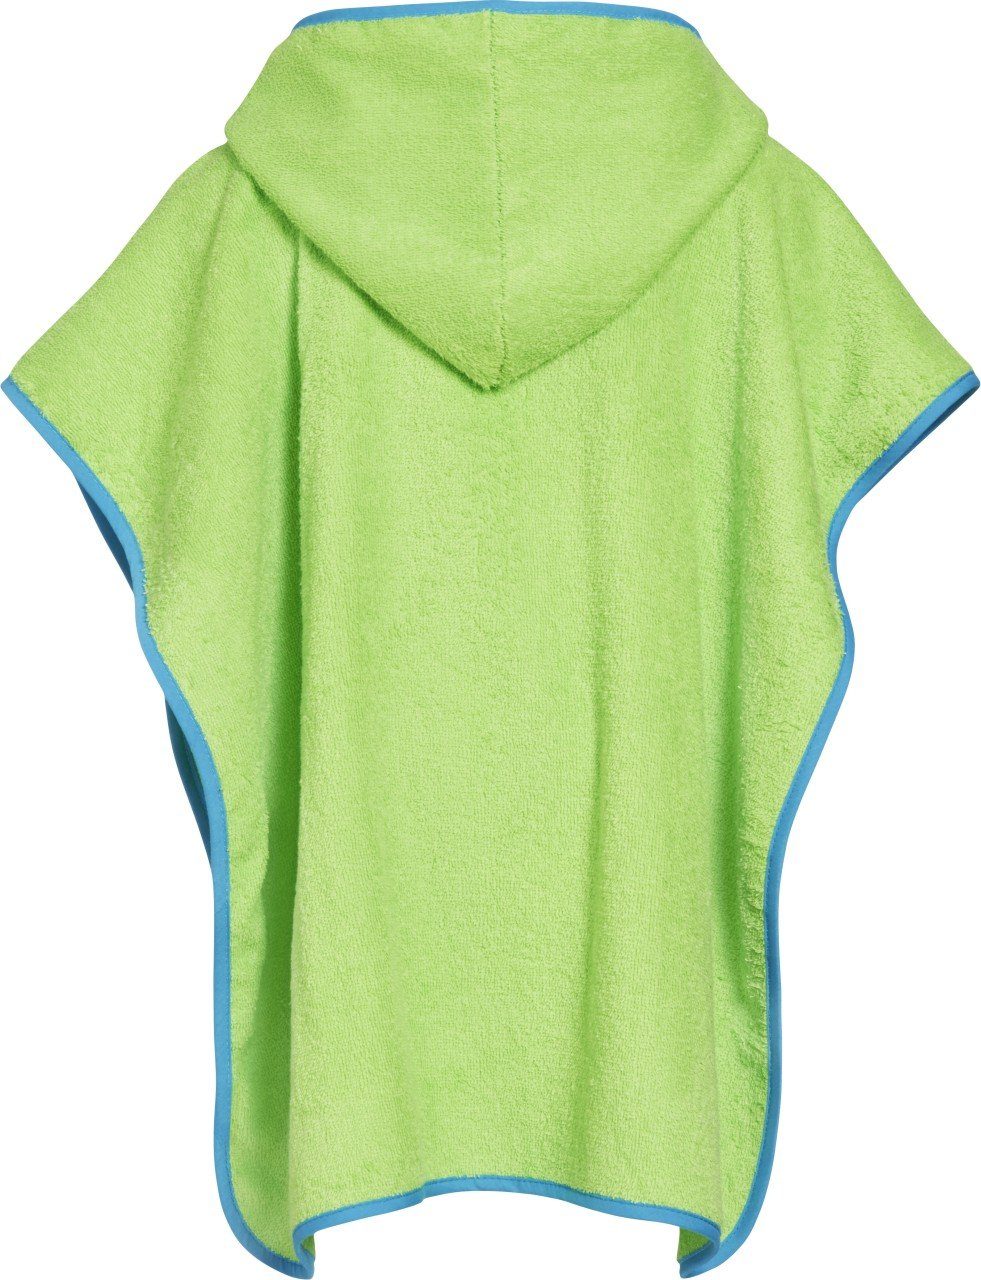 Playshoes Badeponcho Frottee-Poncho Schildkröte